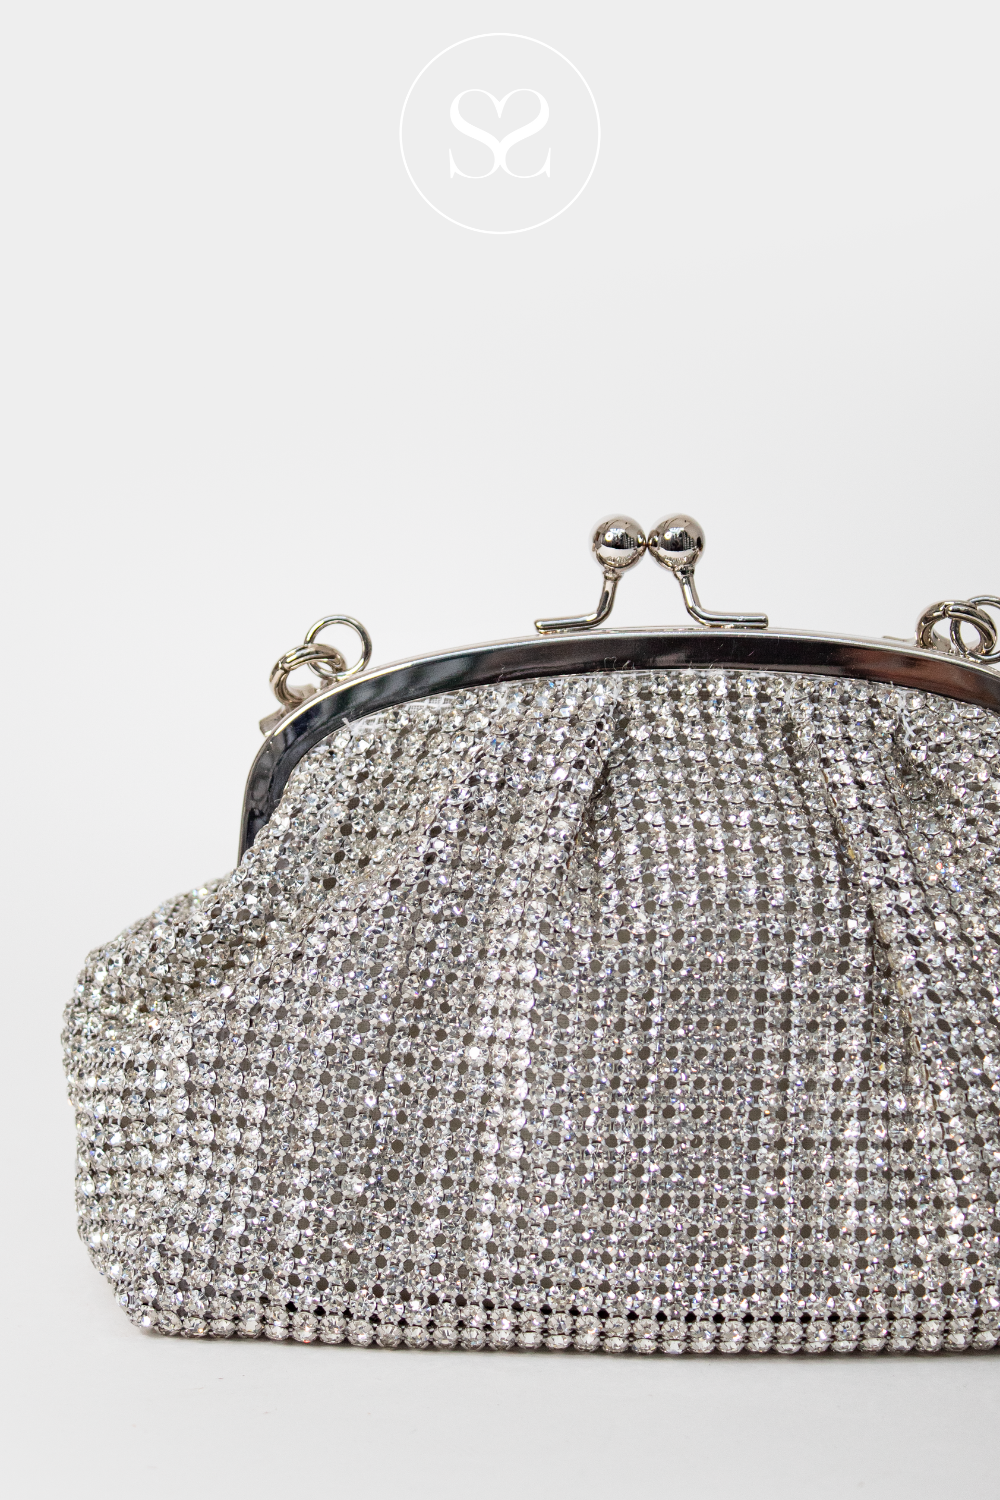 SHENEIL 0634 SILVER DIAMANTE GLITZY PARTYWEAR OCCASSION CLUTCH BAG WITH SNAP CLASP AND SMALL HANDLE